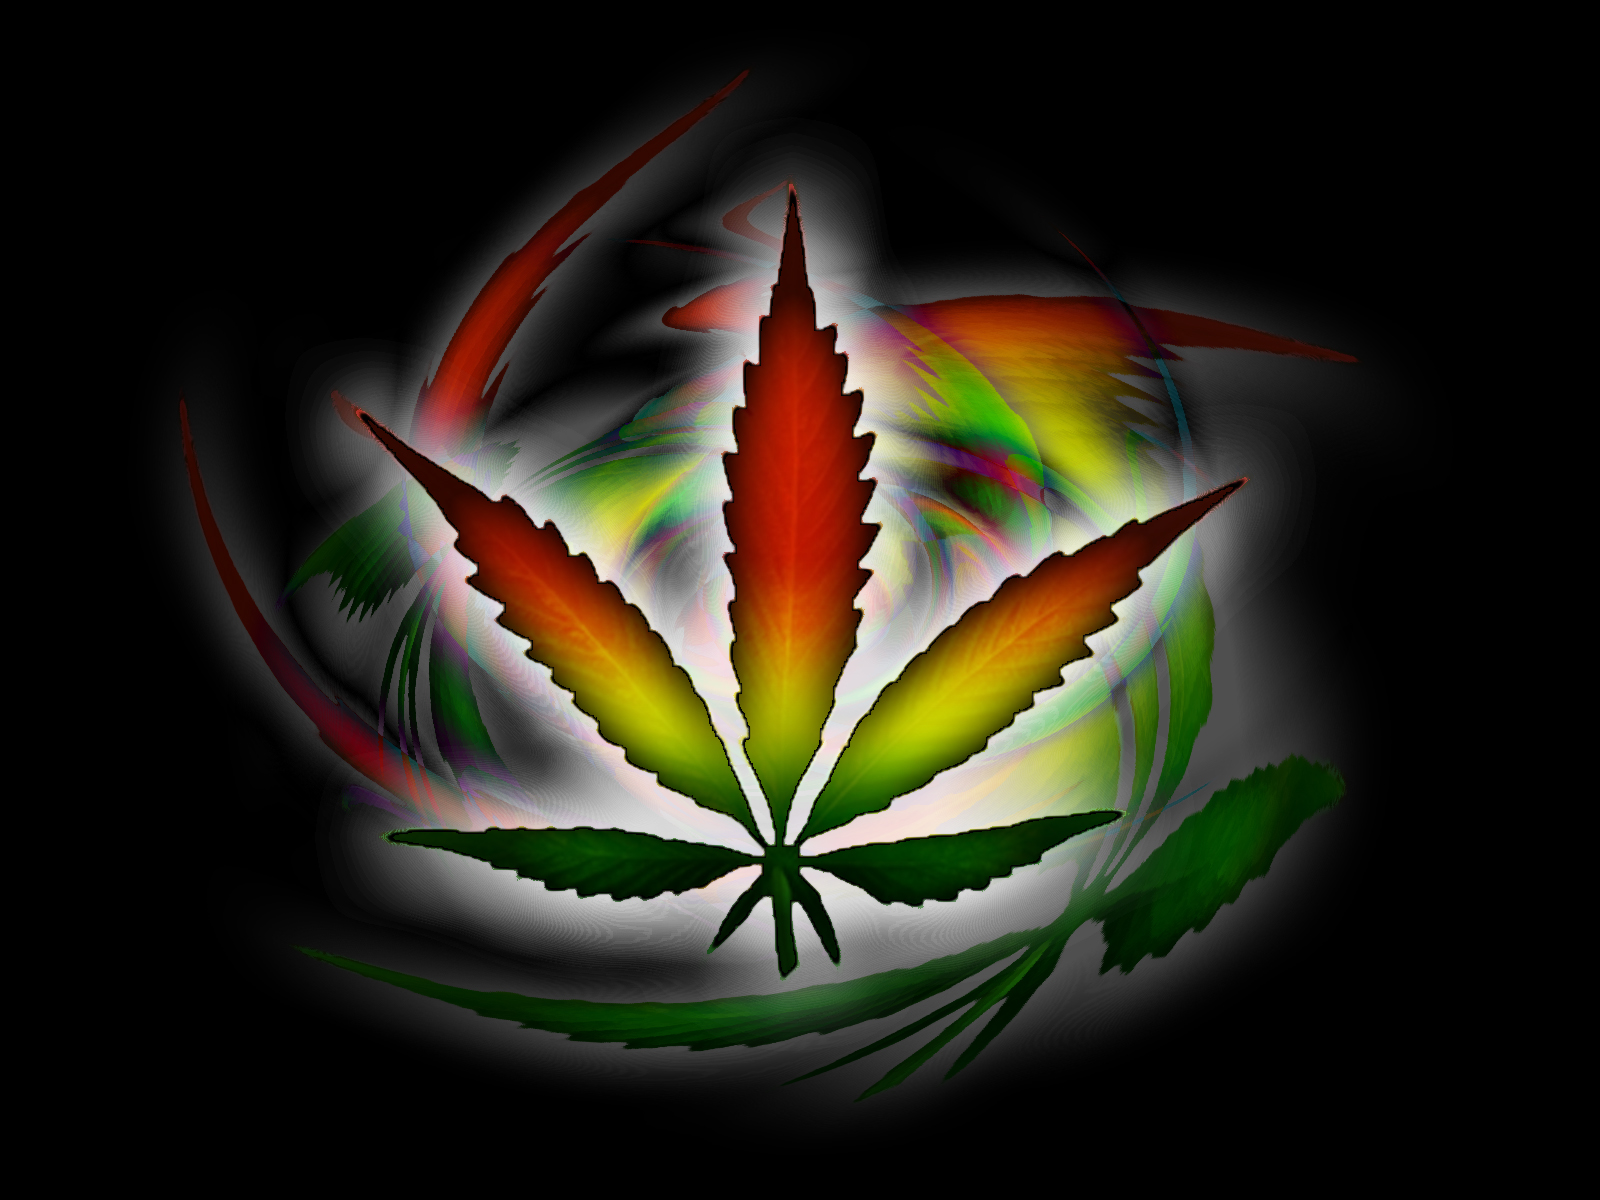 Weed Beautiful Image Of A Multi Colored Pot Leaf With Spinning Smoke